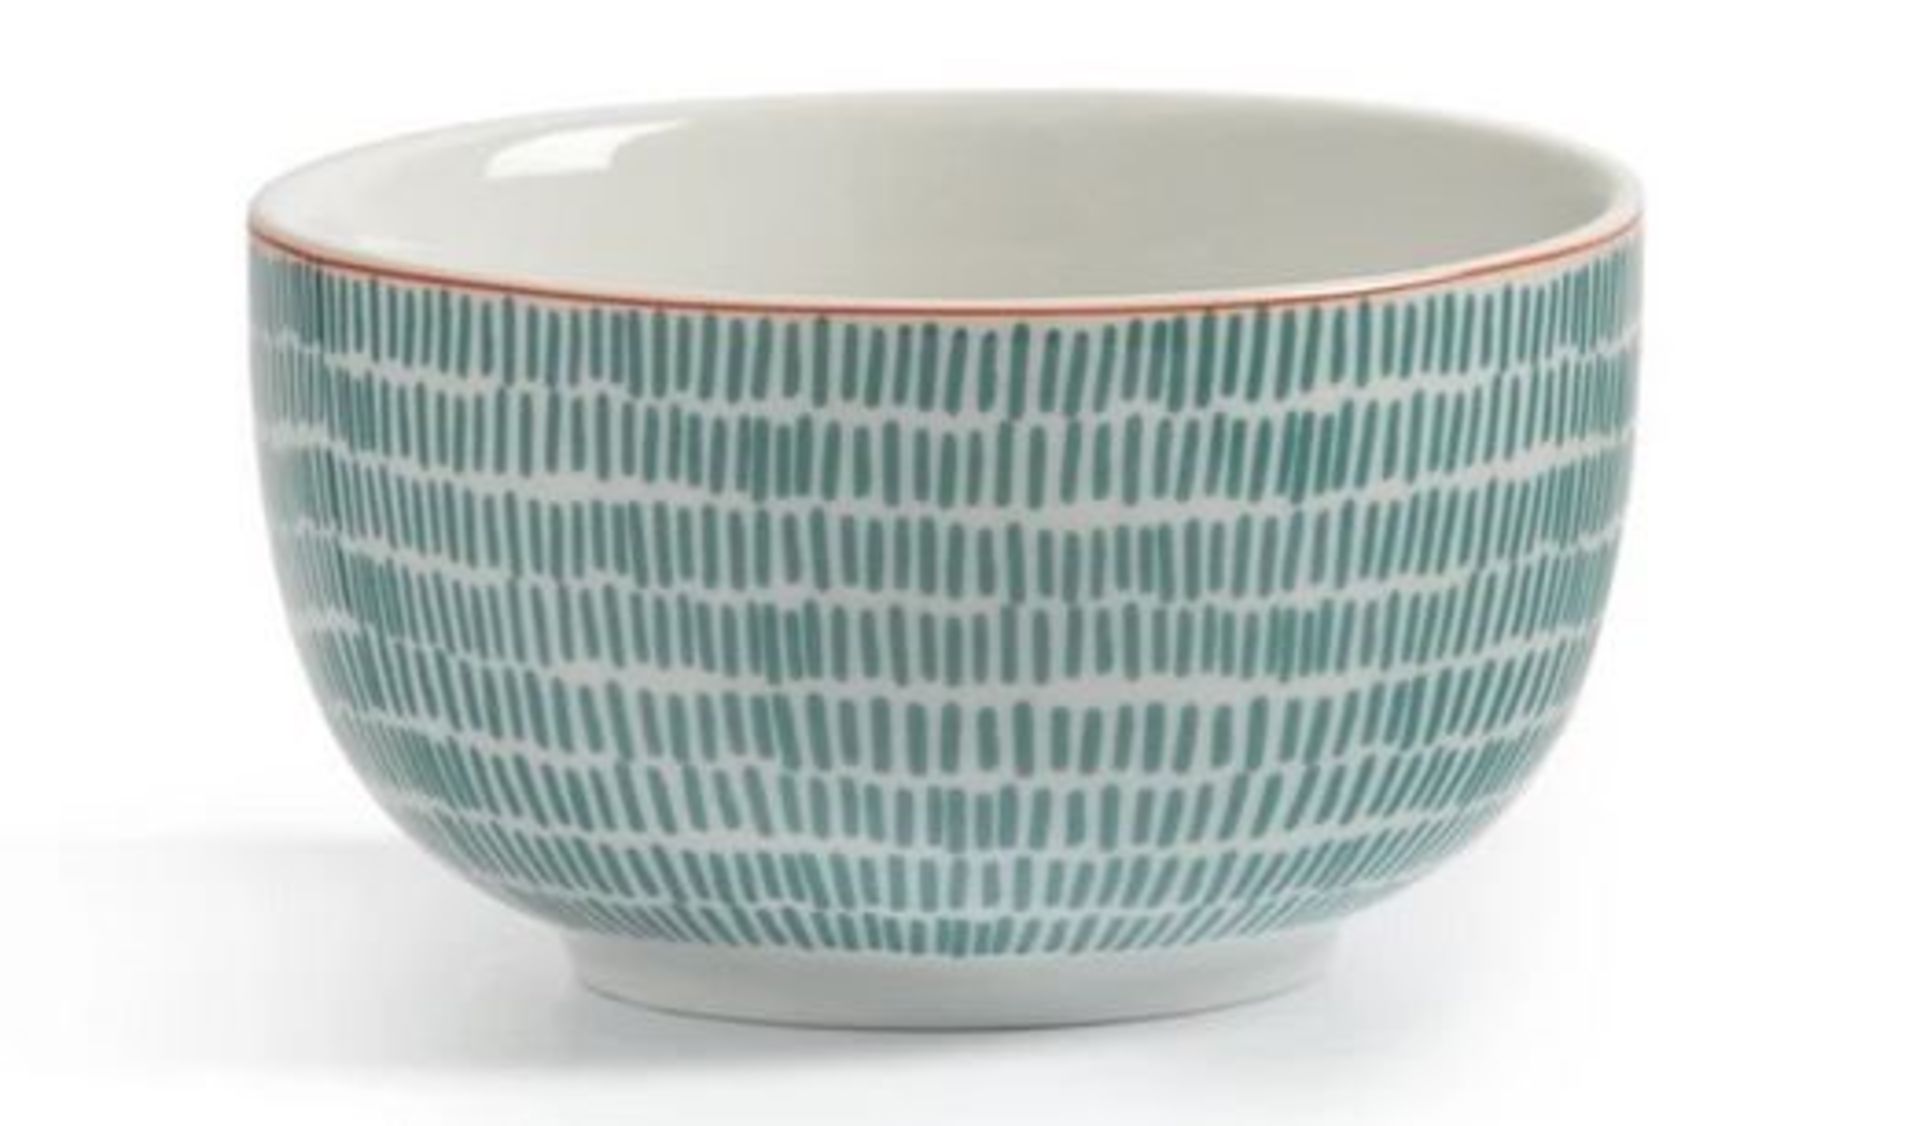 1 AS NEW LA REDOUTE SET OF 3 SMALL AKINA PORCELAIN BOWLS / RRP £15.00 (VIEWING HIGHLY RECOMMENDED)